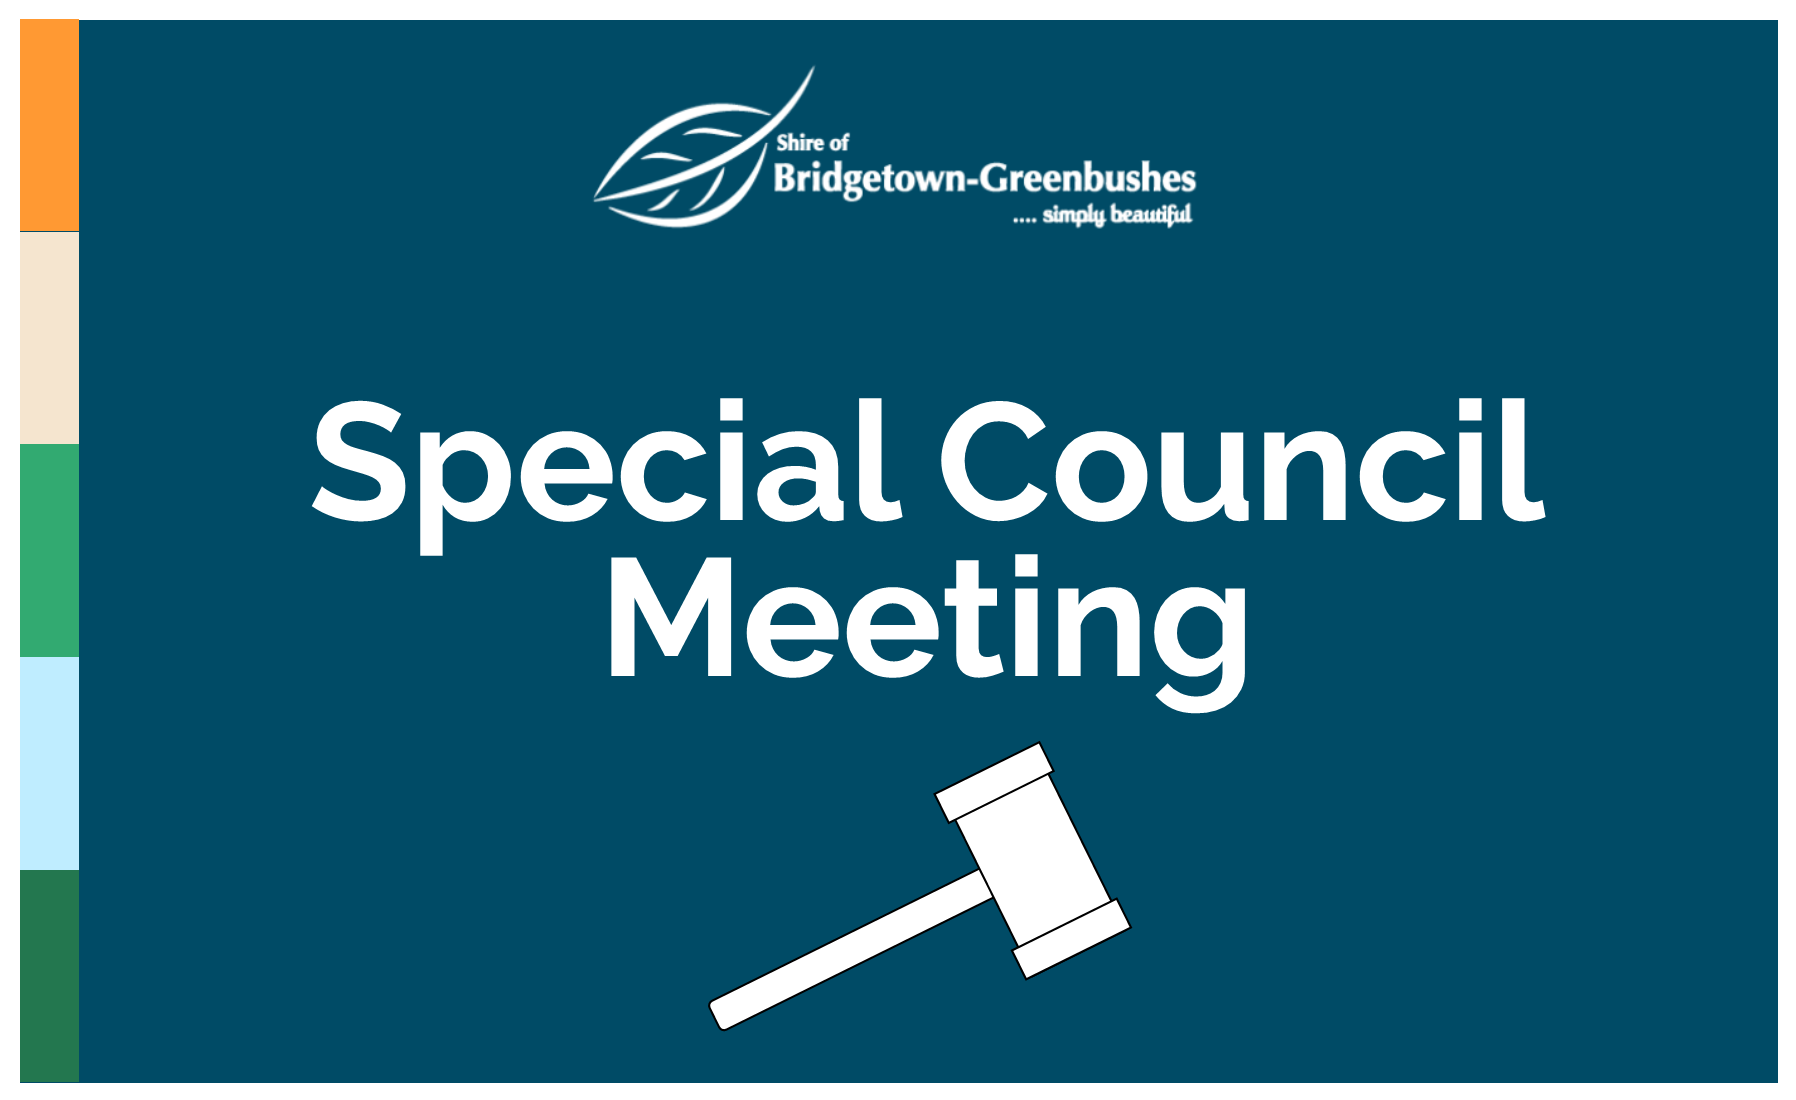 Special Council Meeting graphic